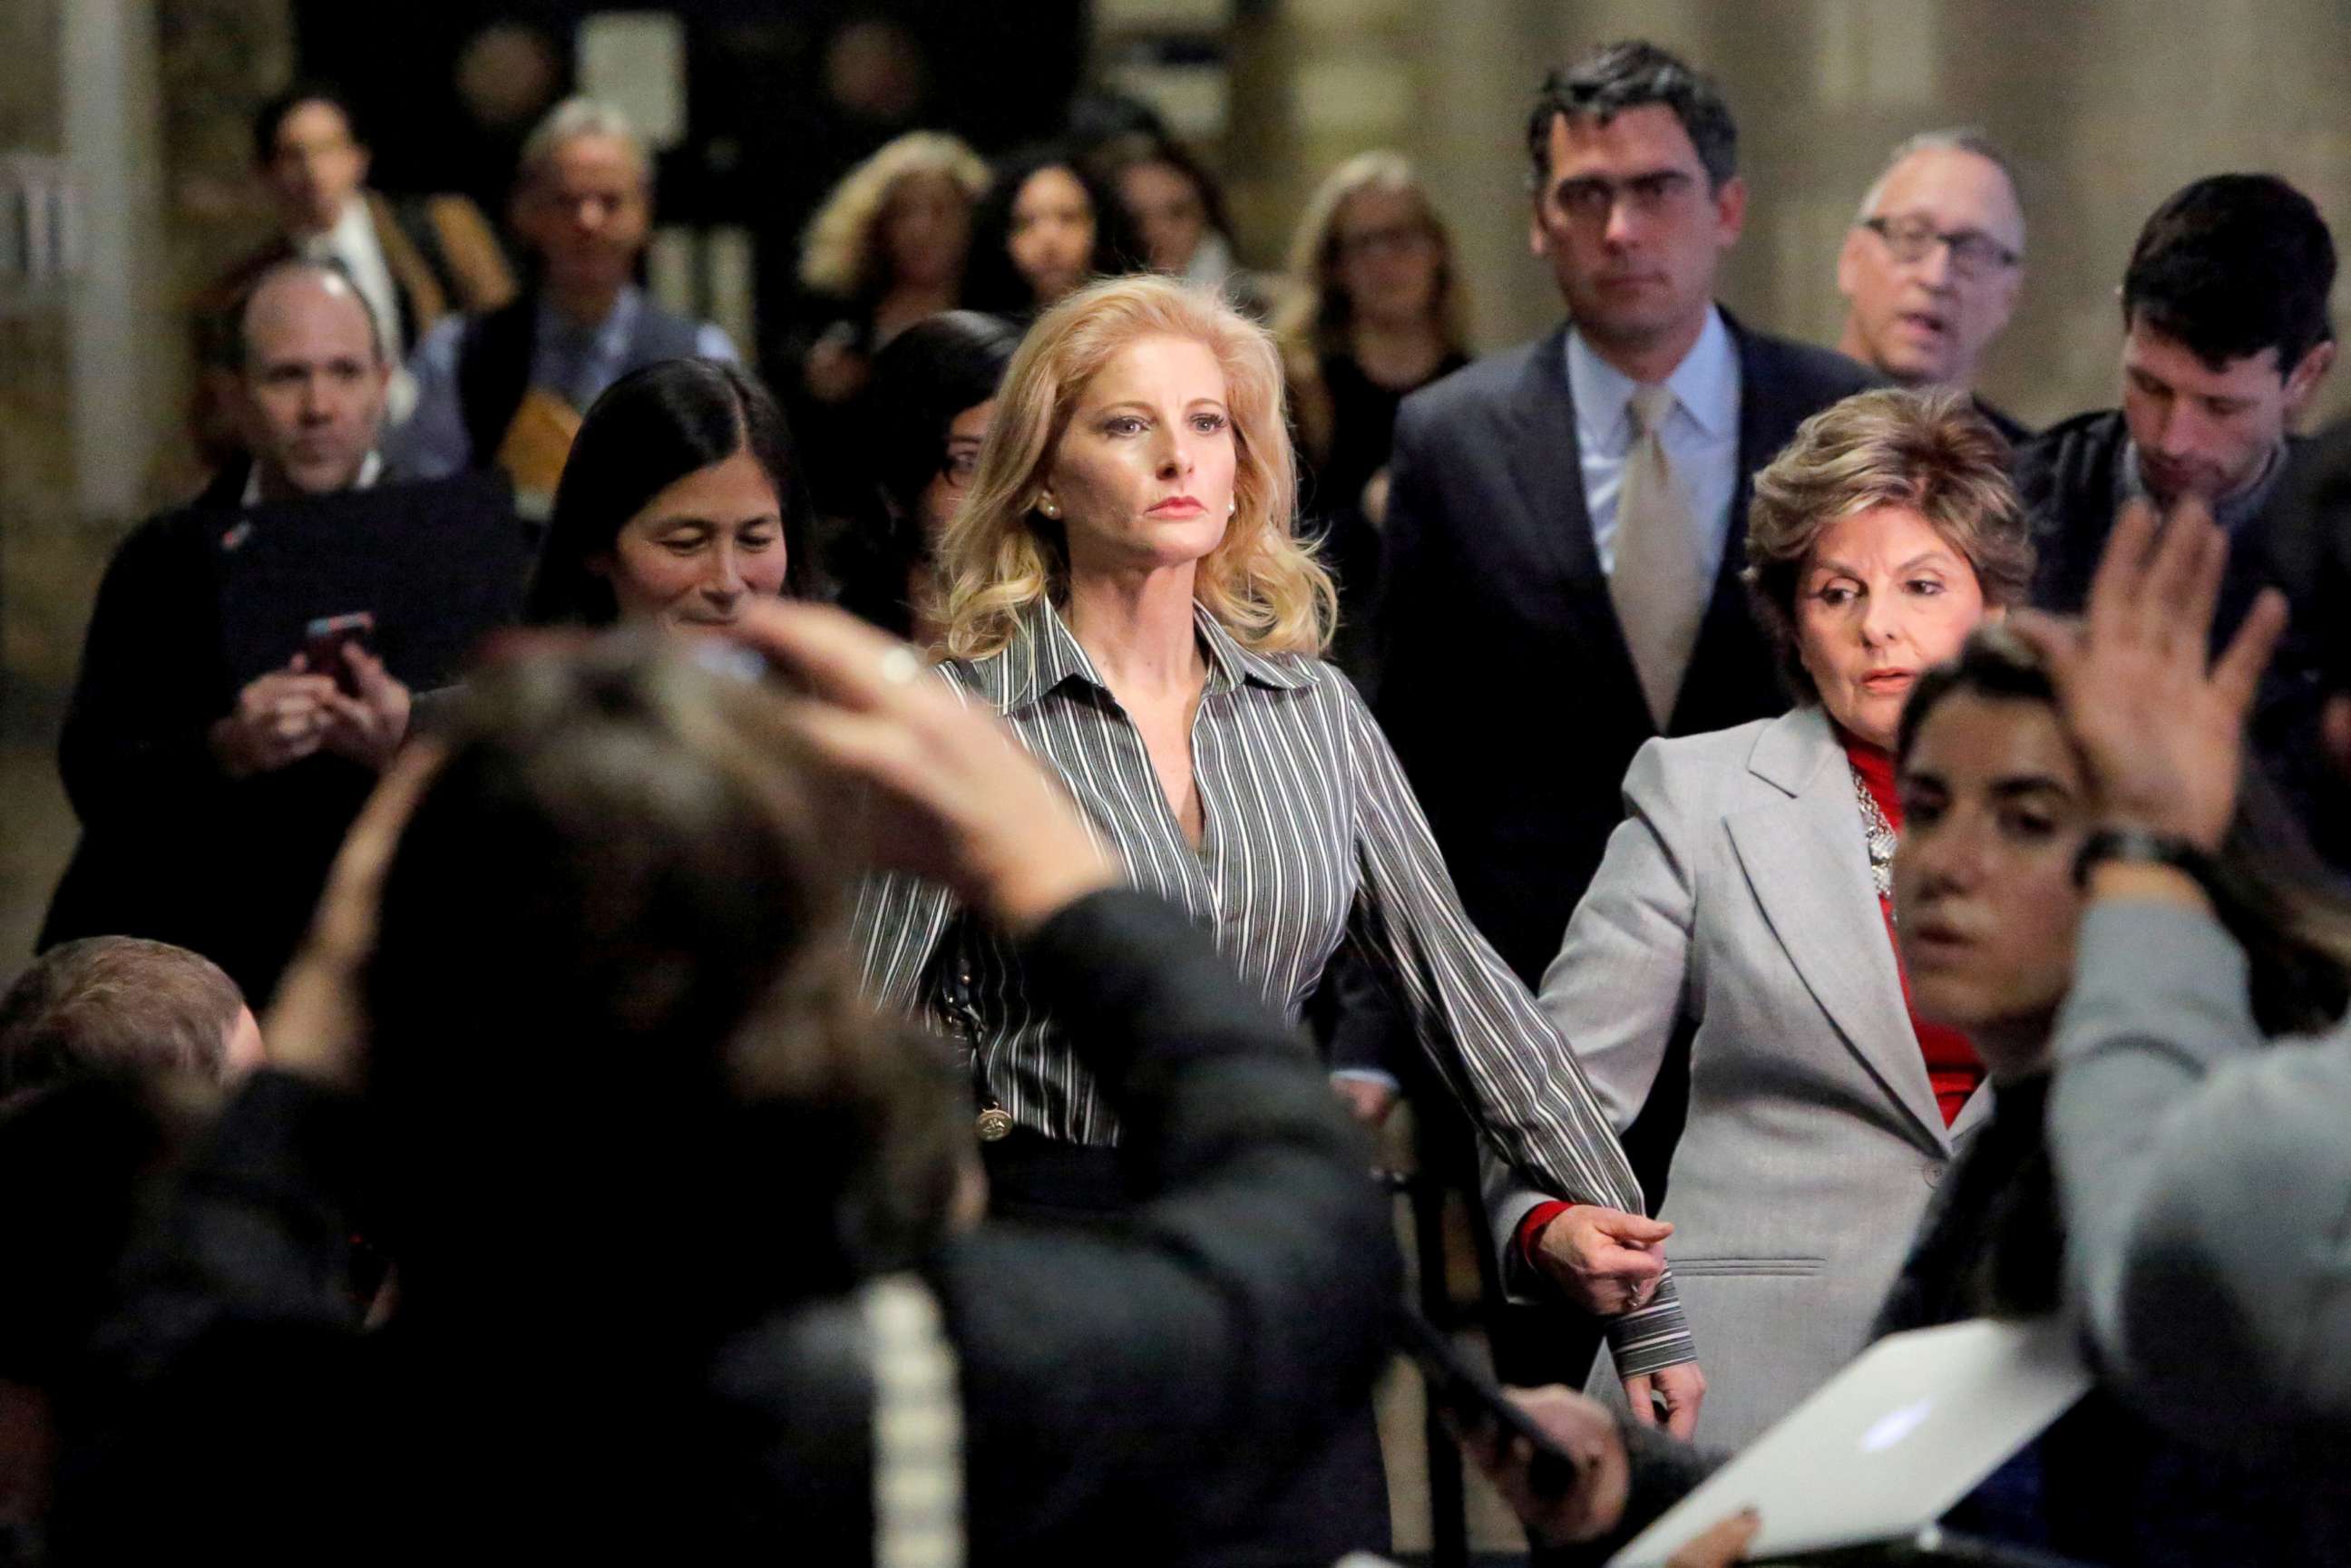 PHOTO: In this file photo, Summer Zervos, a former contestant on The Apprentice, leaves New York State Supreme Court with attorney Gloria Allred (R) after a hearing on the defamation case against President Donald Trump in New York City, Dec. 5, 2017.